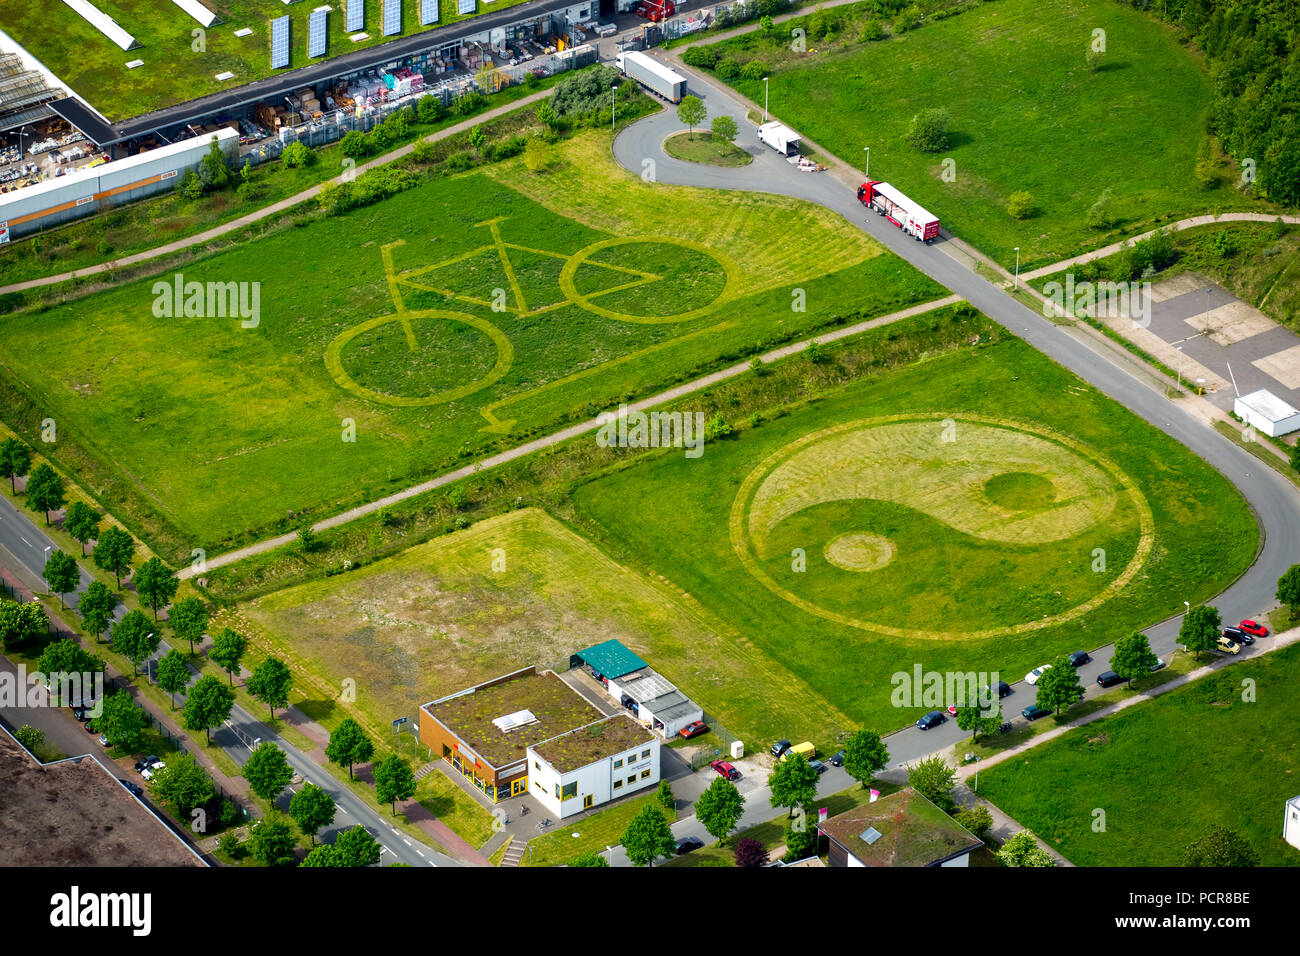 Mowing Art, Lawnmower Art, Lawn Mower Art, Bicycle and Yin and Yang characters were mowed into a meadow, Lawn Mower Art, Hamm, Ruhr area, North Rhine-Westphalia, Germany Stock Photo